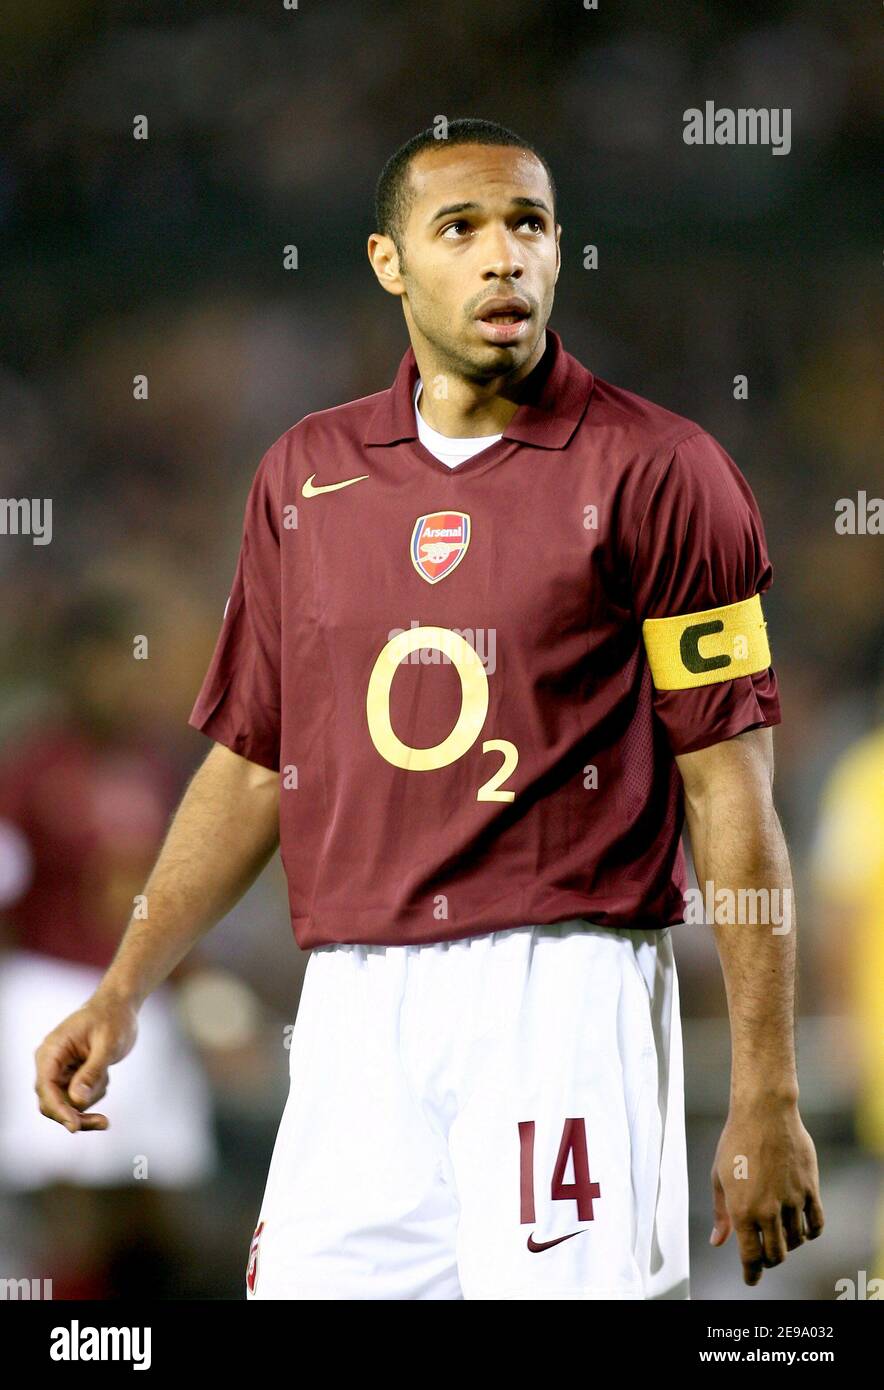 Arsenal's Thierry Henry during the UEFA Champions League Semi-Final Second  Leg, Villarreal vs Arsenal at the 'El Madriga' Stadium, in Villareal,  Spain, on April 25, 2006. The game ended in draw 0-0